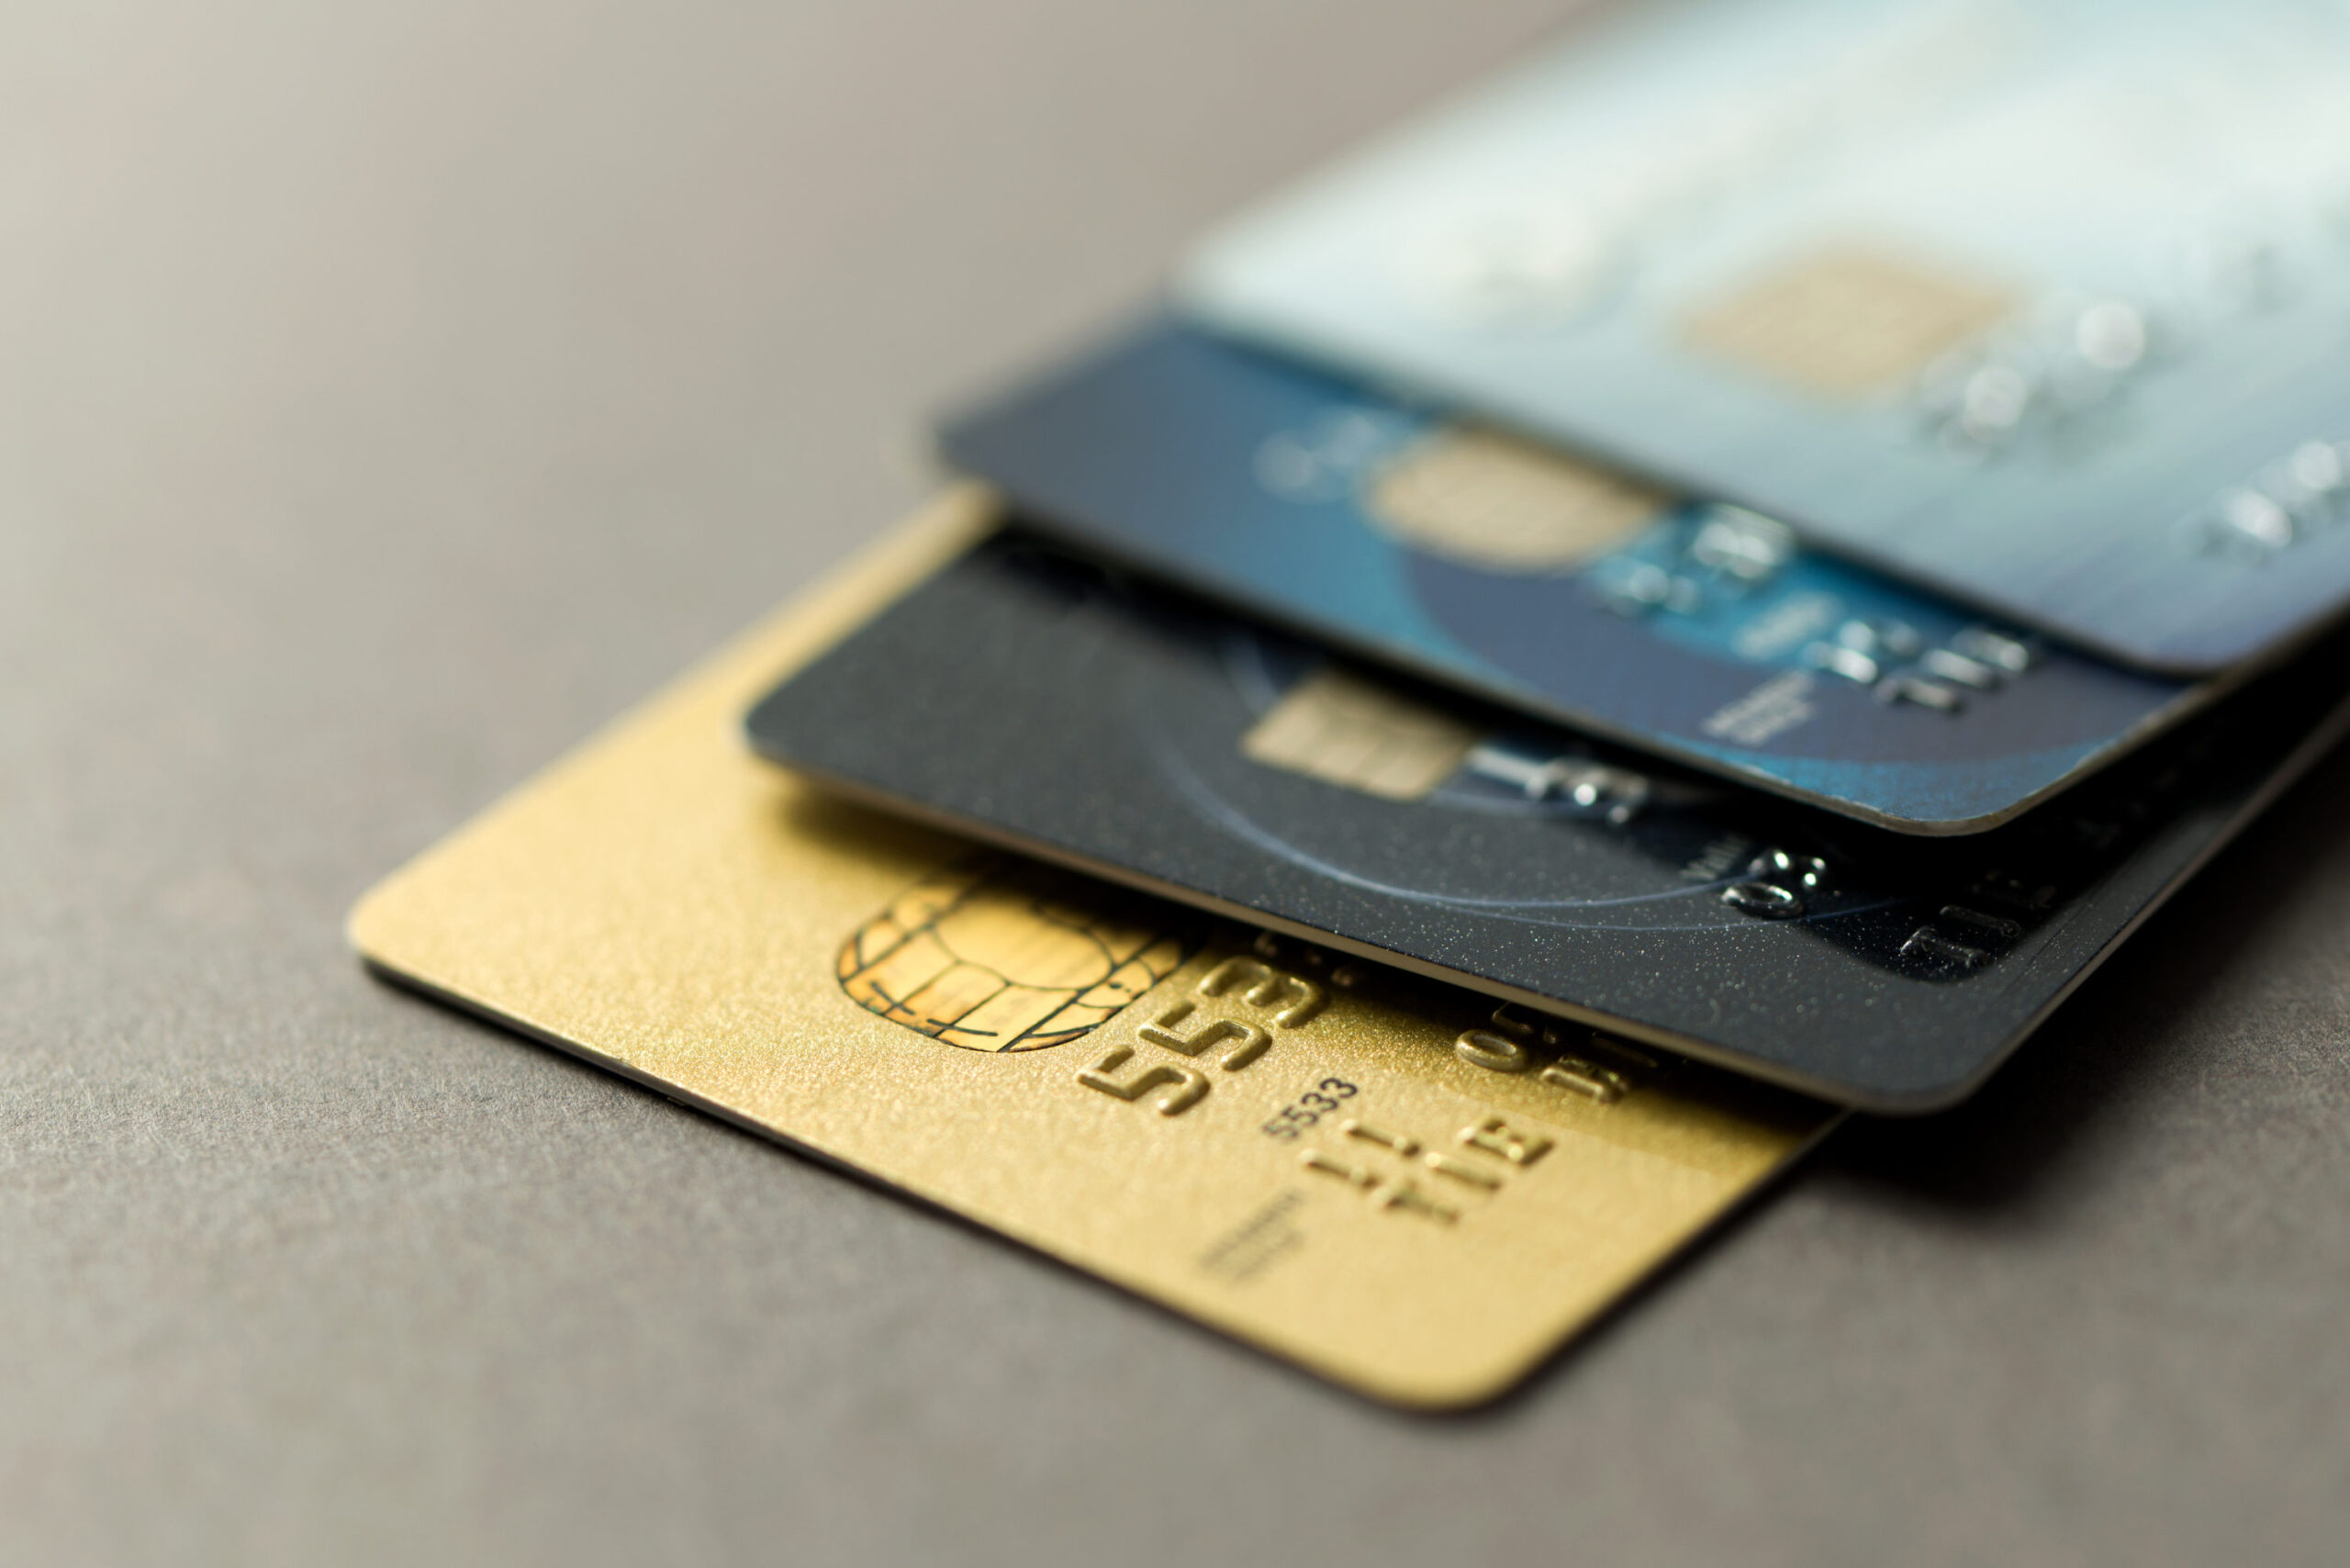 Why people choose the wrong credit card